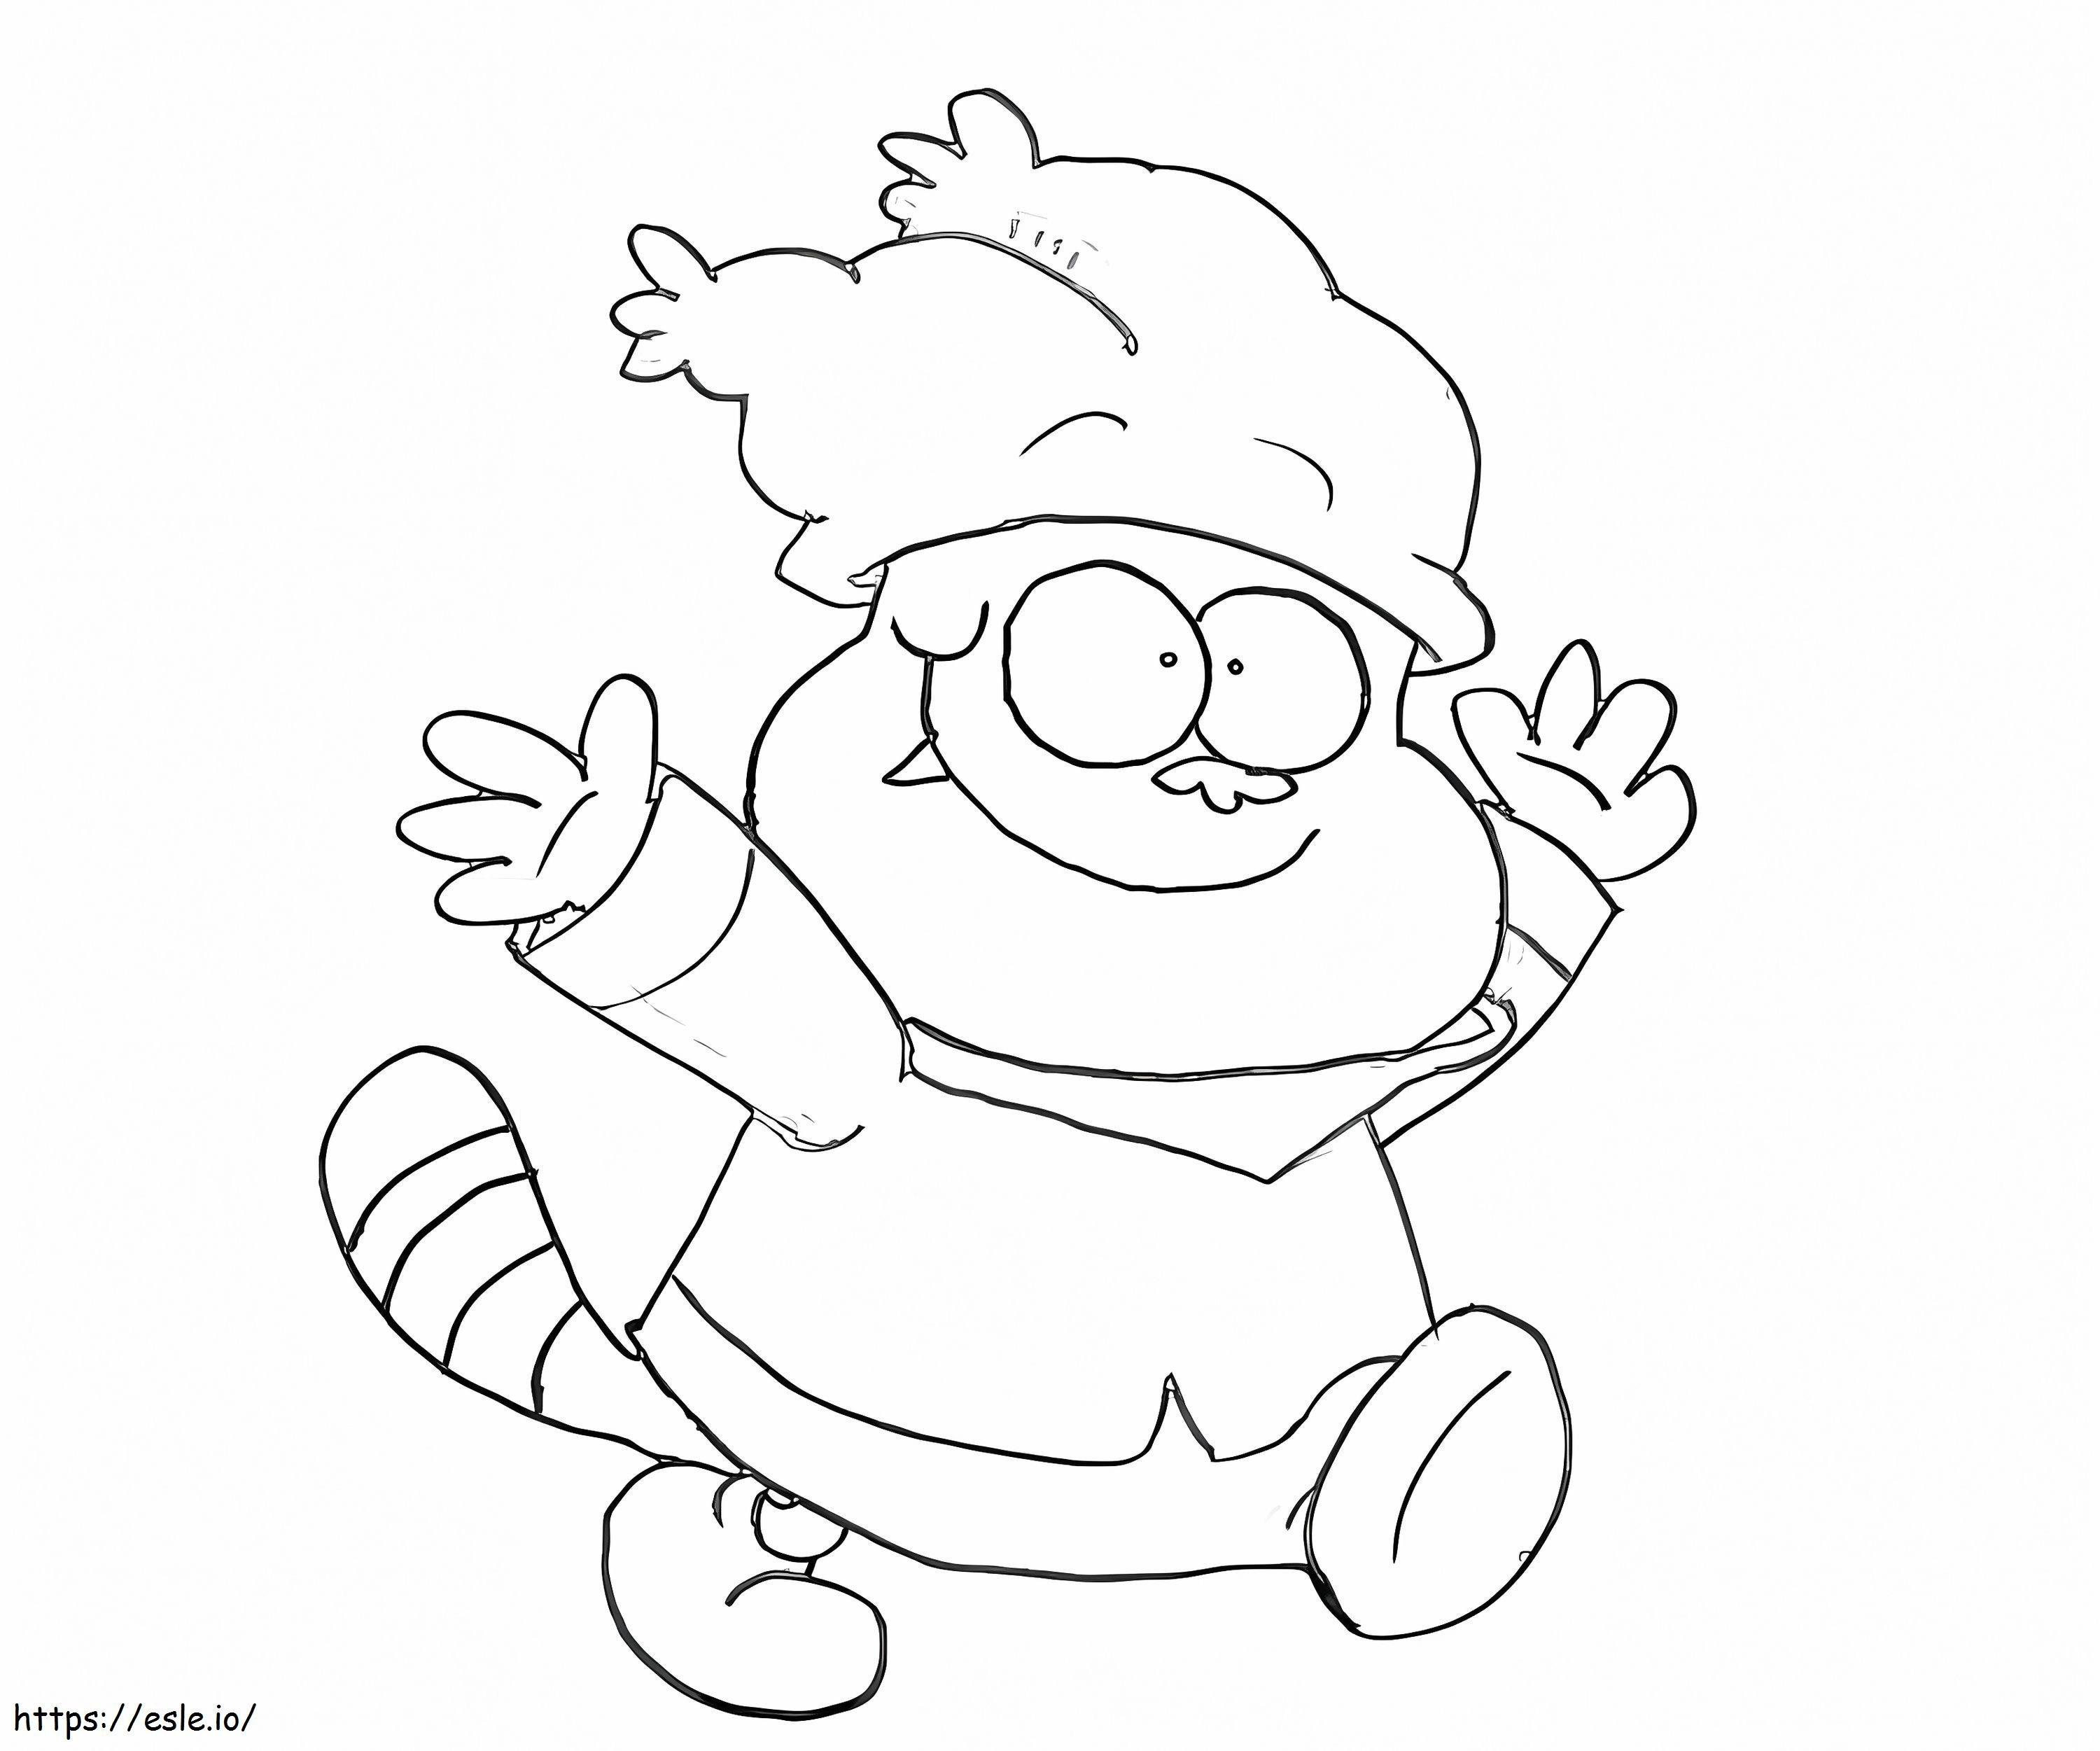 Funny Chowder coloring page